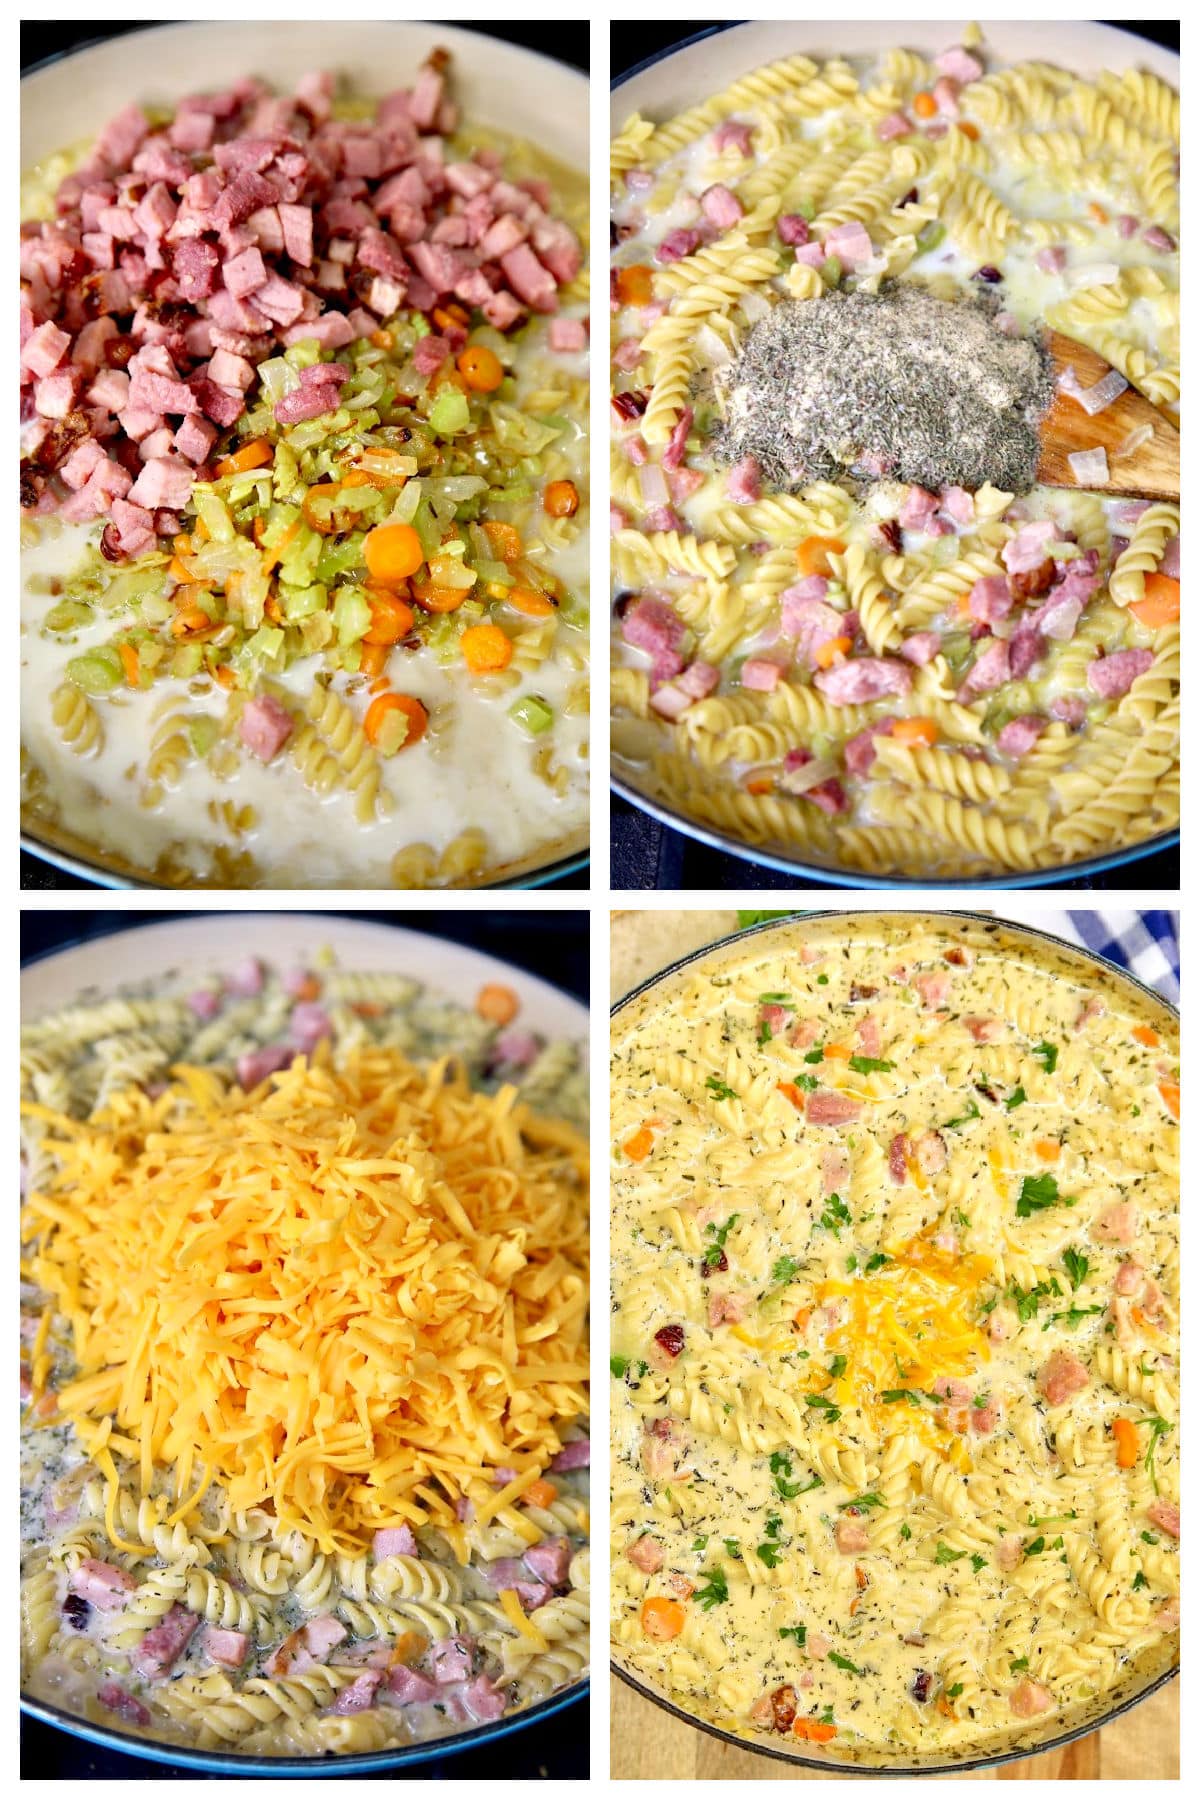 Collage making ham soup with vegetables, pasta and cheese.